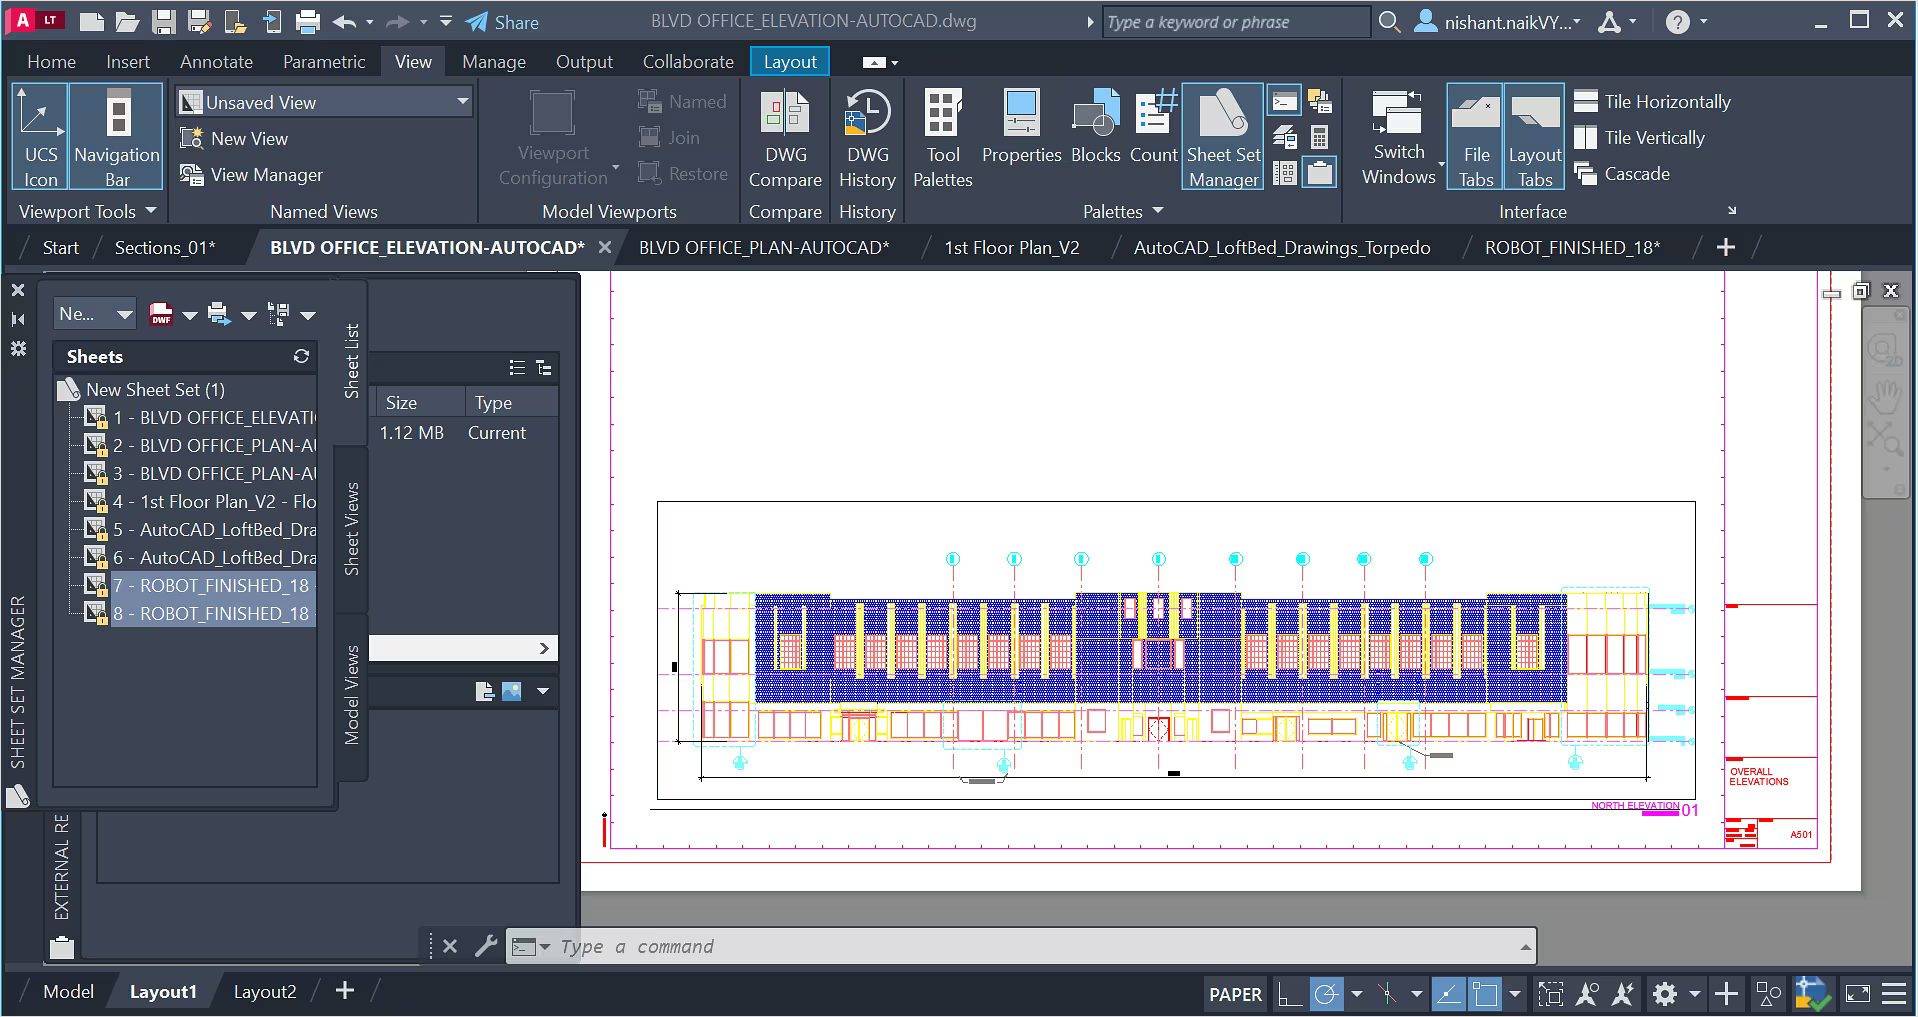 Screenshot of AutoCAD LT's sheet set manager functionality